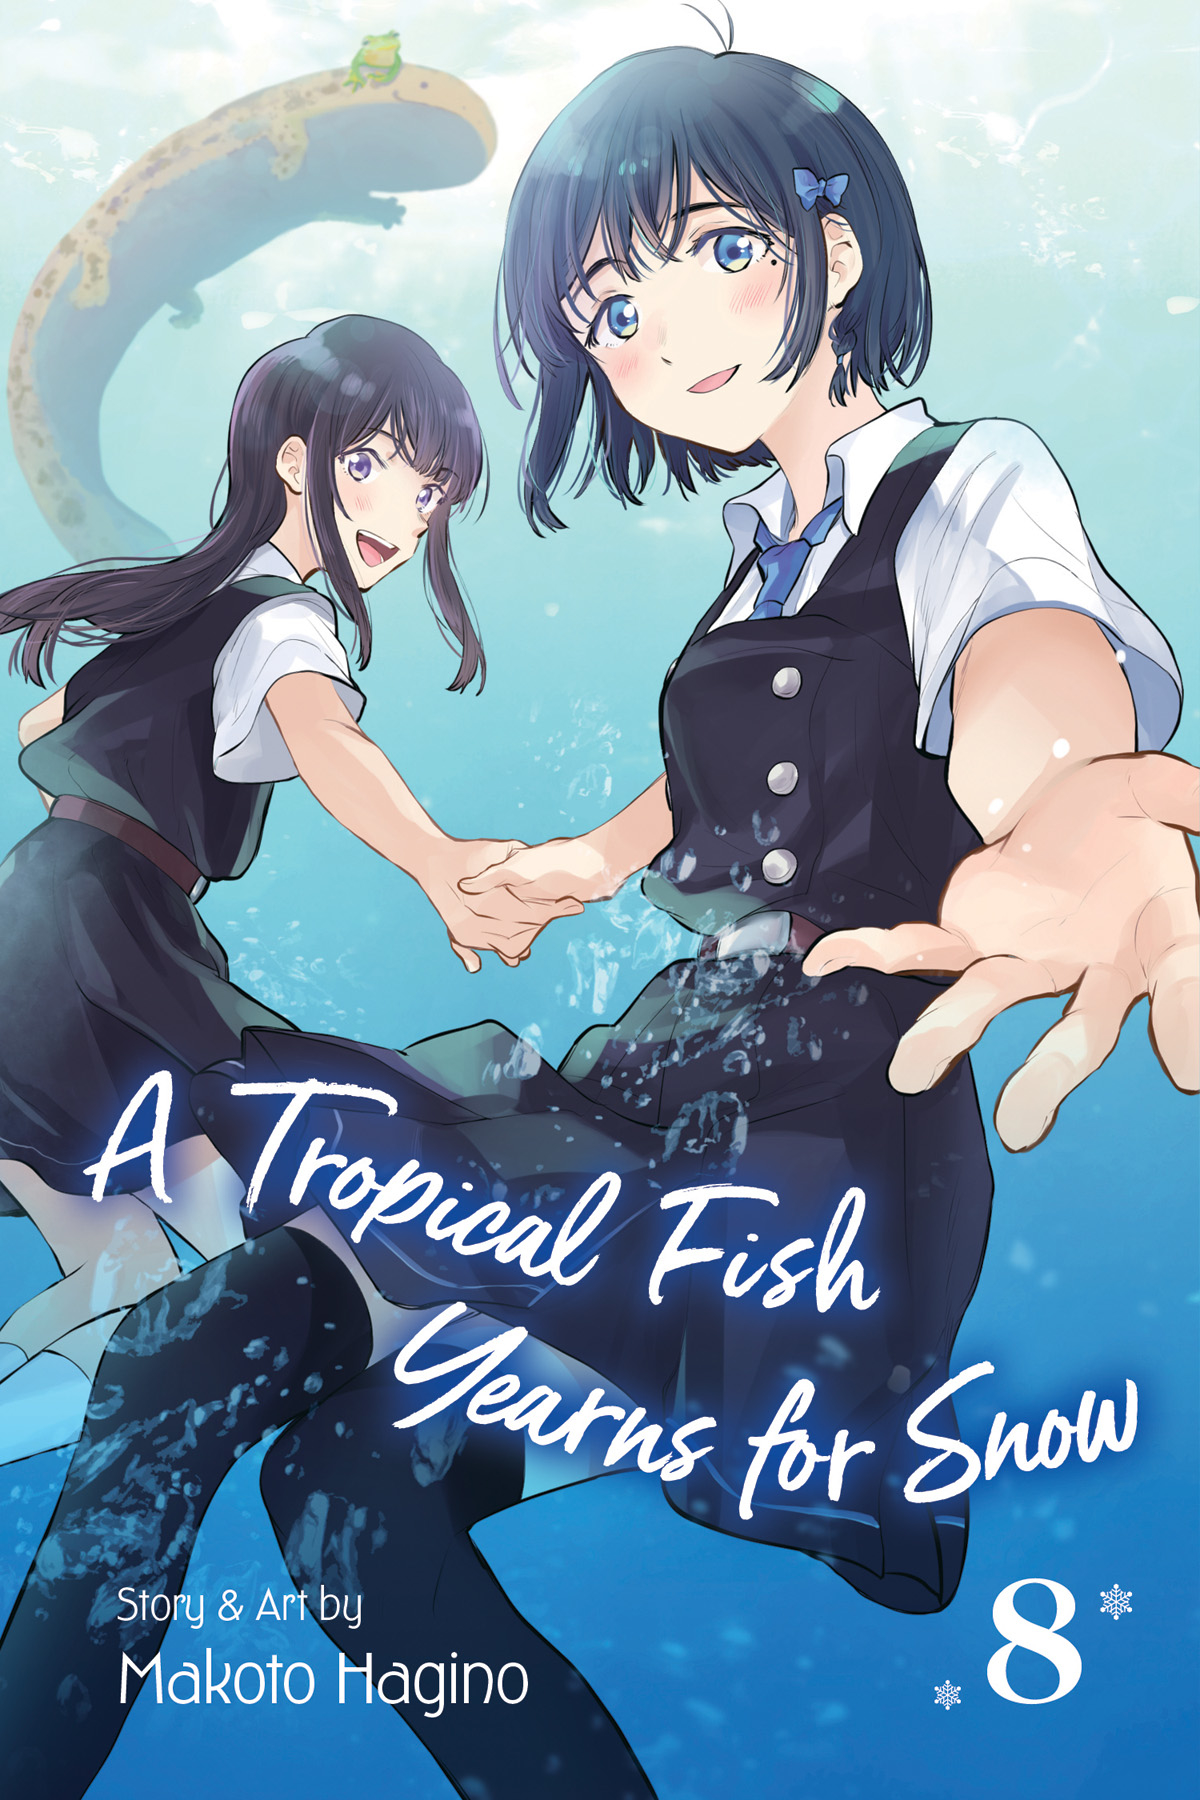 A Tropical Fish Yearns For Snow Manga Volume 8